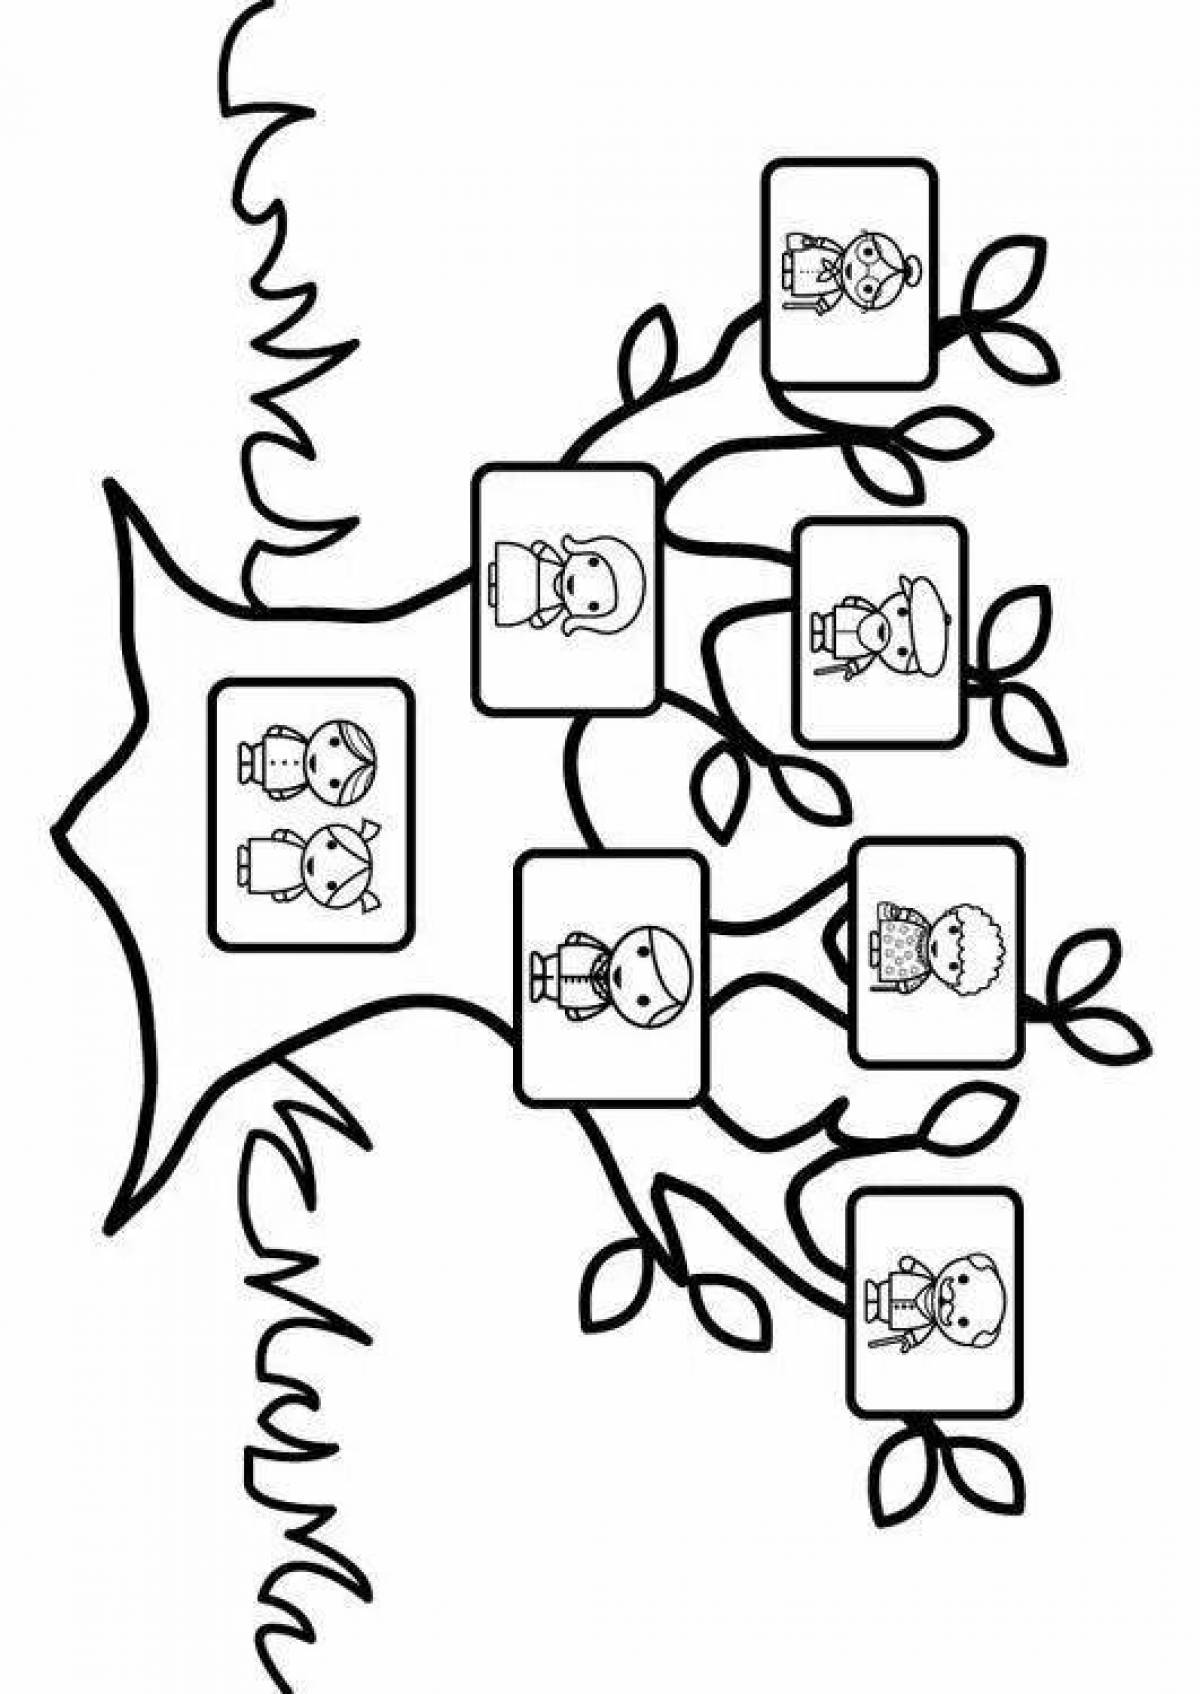 Glamorous family tree coloring book